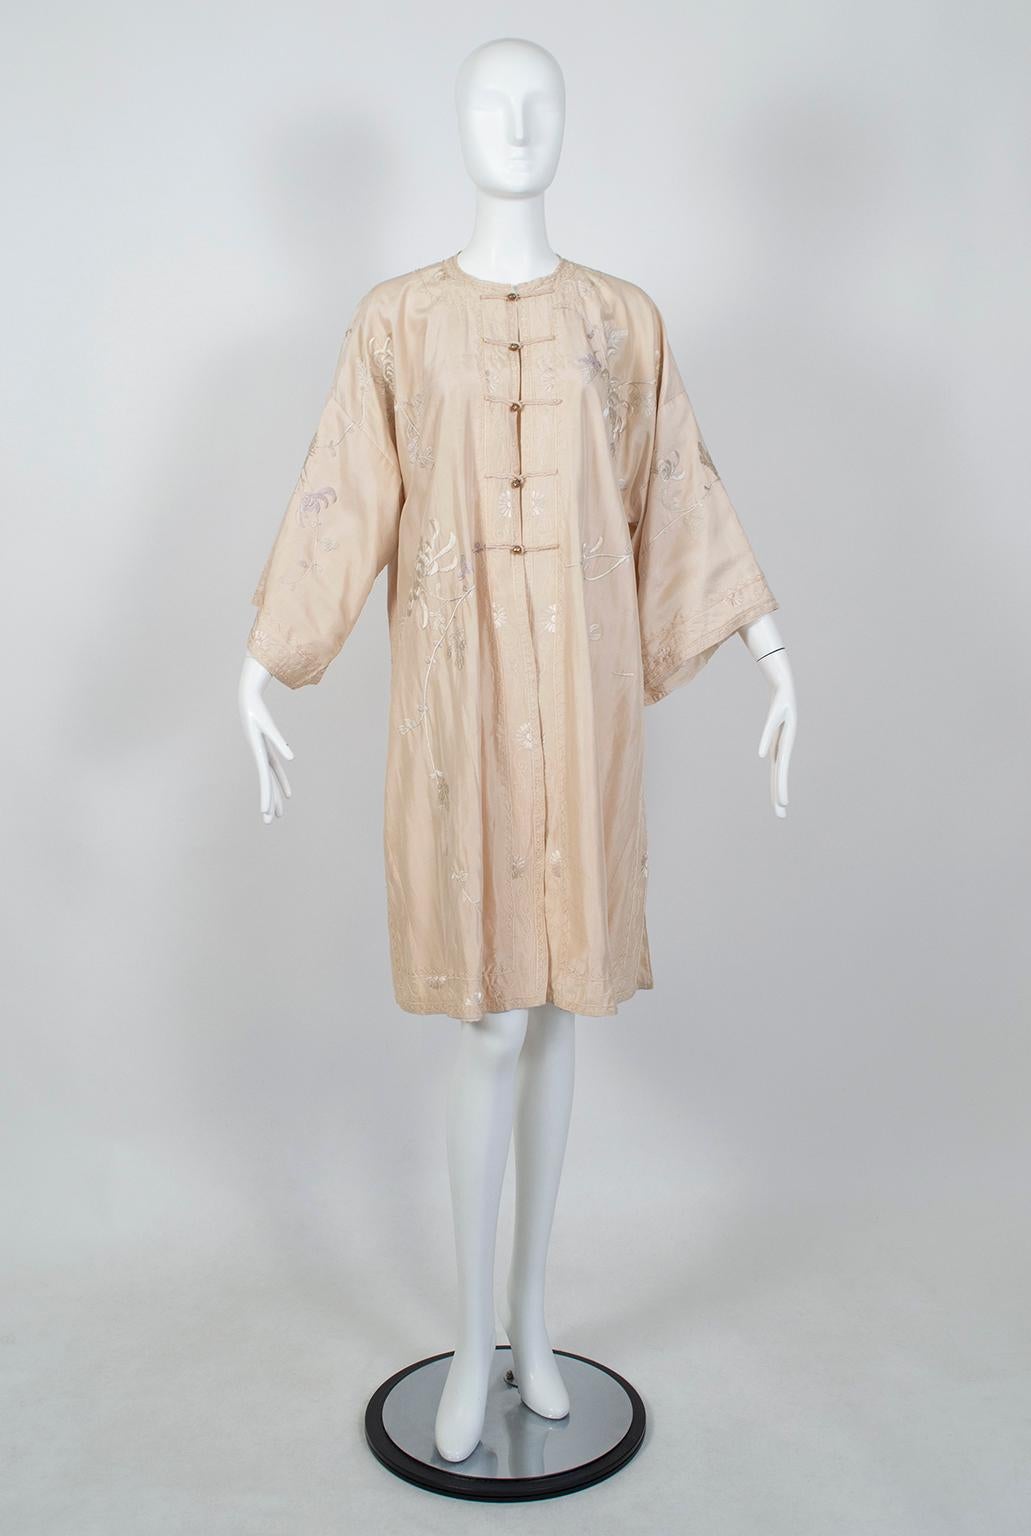 Though this robe’s delicate pastel hue and exquisite softness make it an ideal dressing gown, it would be such a shame to hide it behind closed doors. Cut much like a 1950s swing coat, it could easily double for lightweight outerwear or a chic tunic